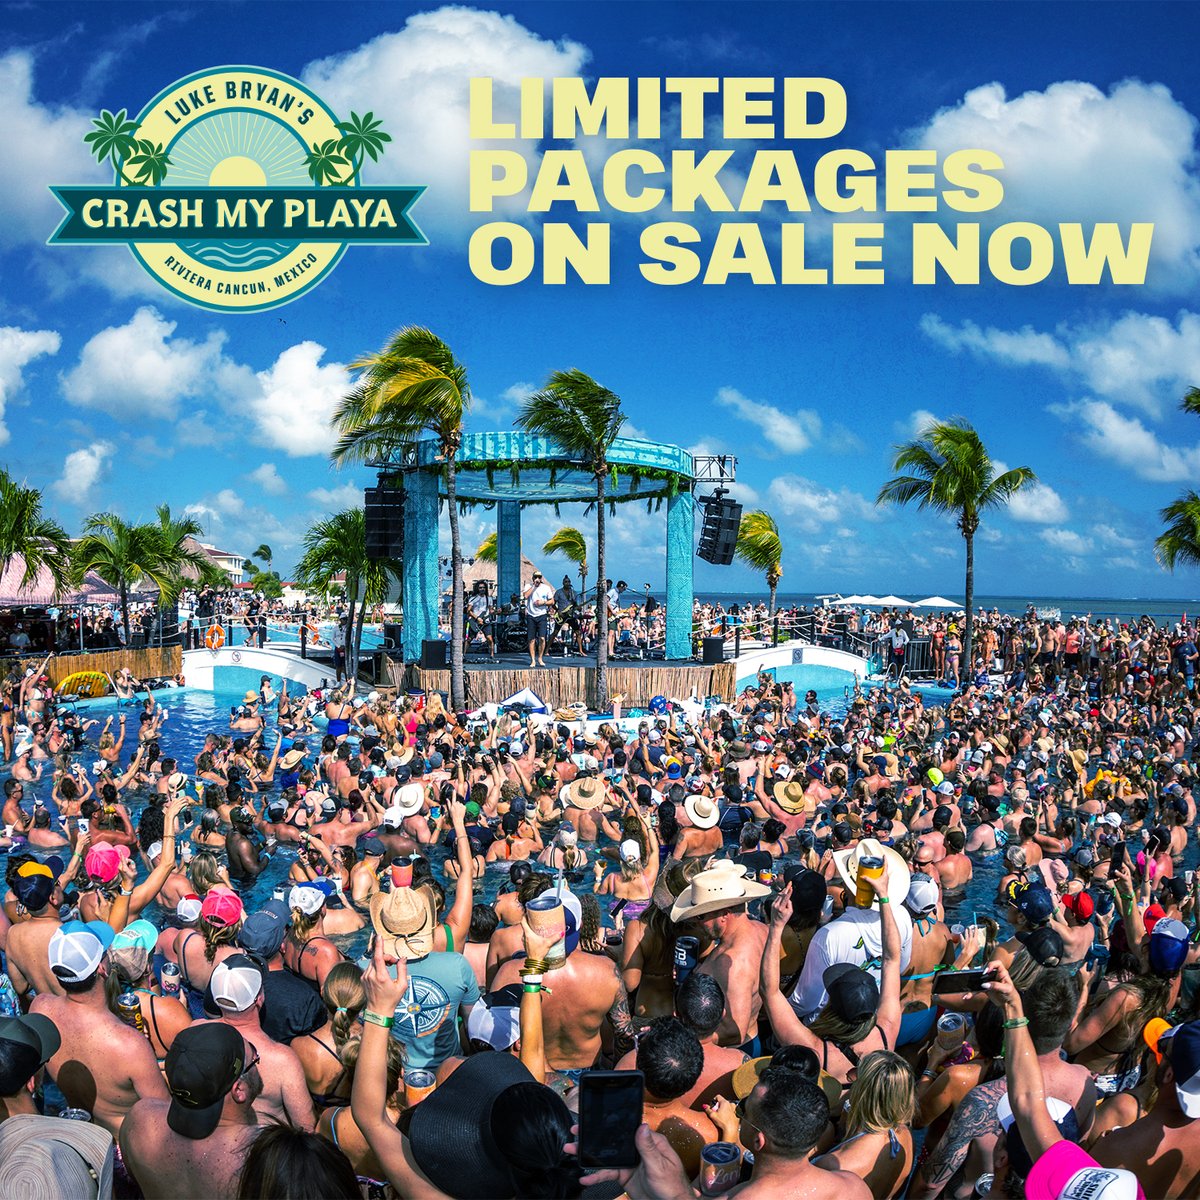 A limited amount of @CrashMyPlaya packages are available now. See y'all in paradise! crashmyplaya.com